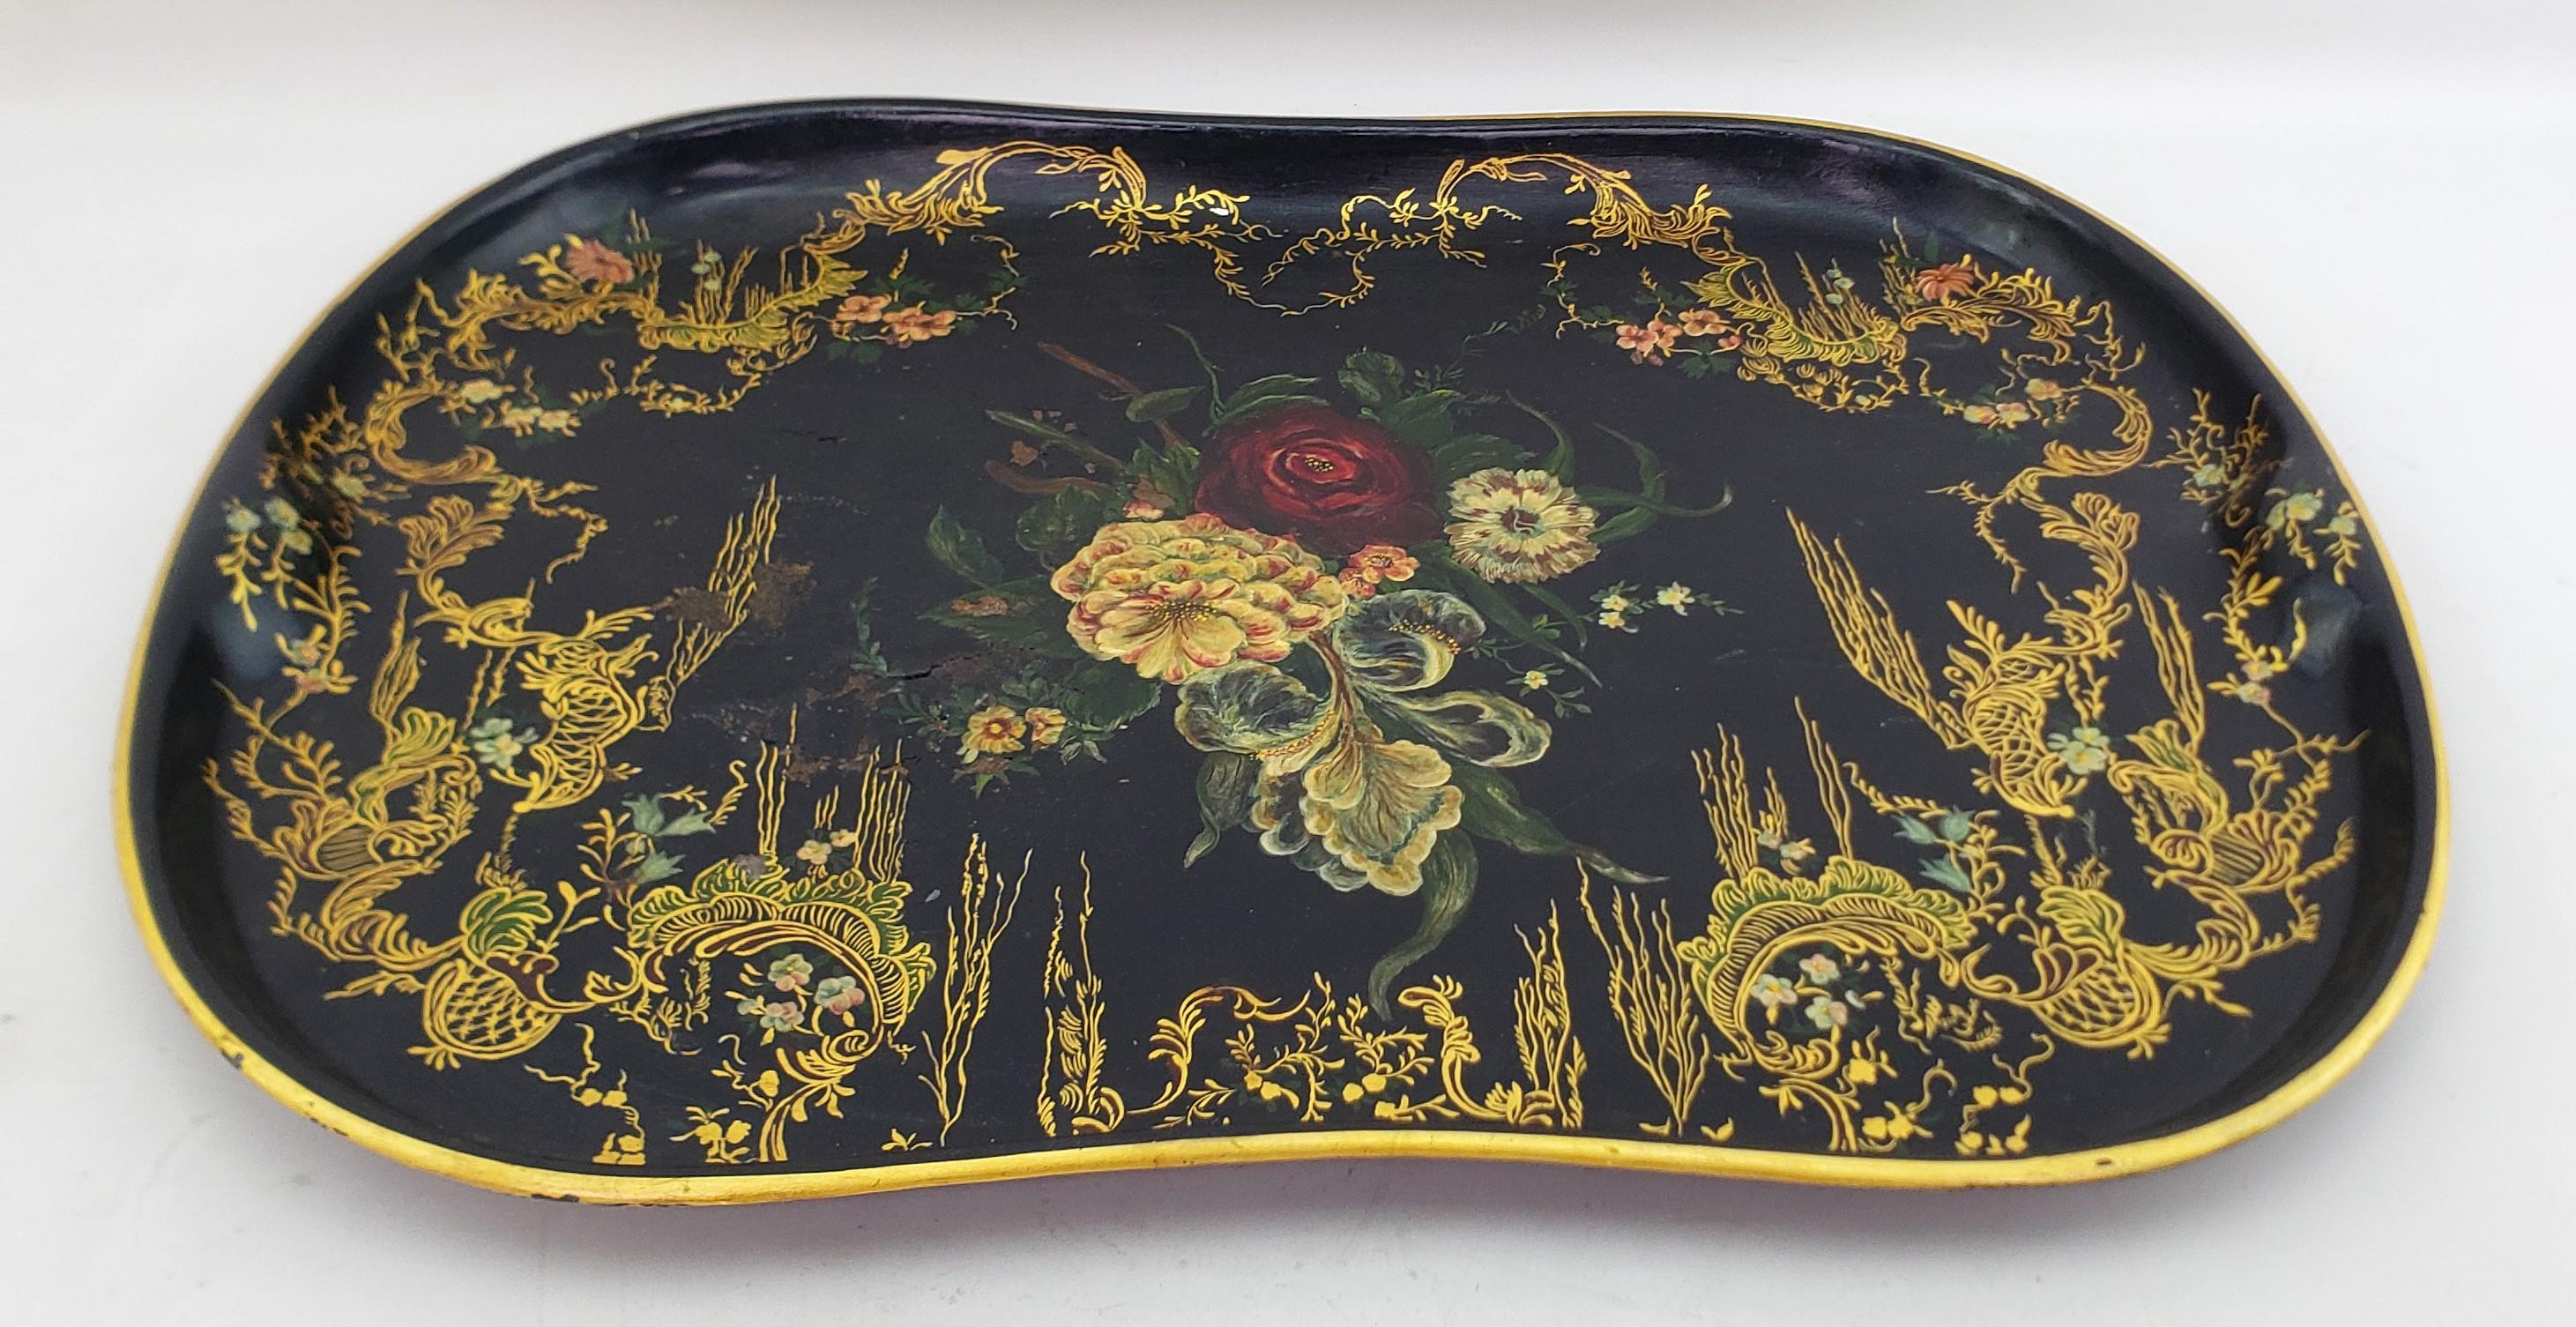 Late Victorian Large Antique Toleware Serving Tray with Floral Decoration & Gilt Accents For Sale